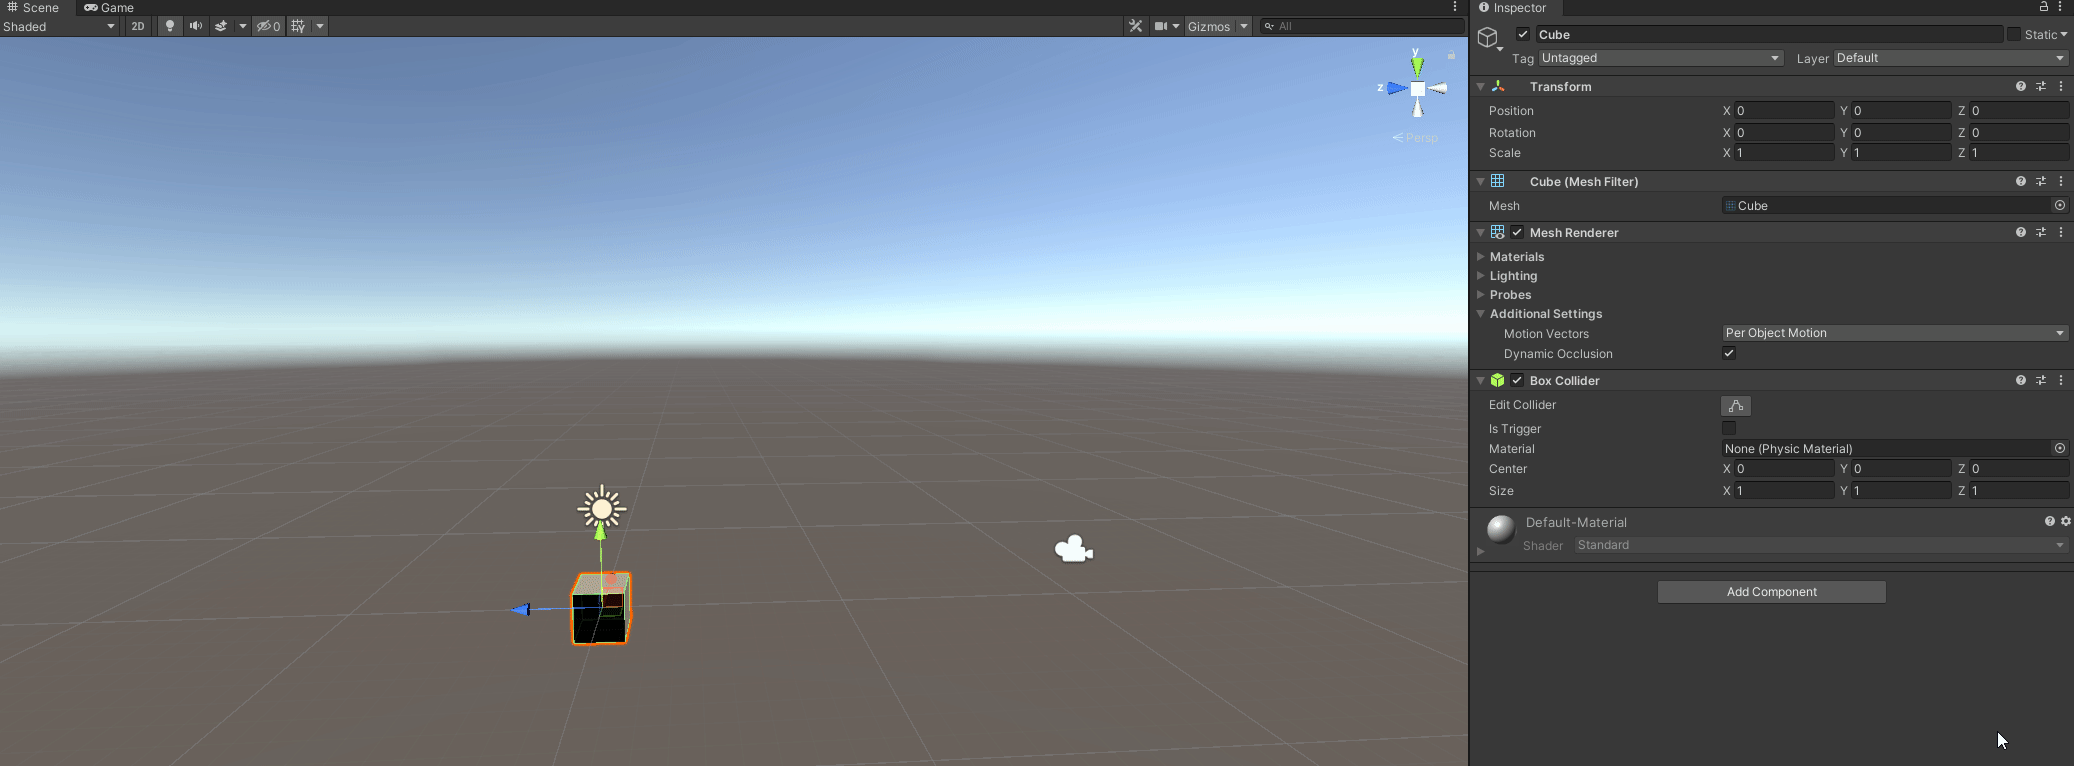 Create a GameObjects and applying materials | by Matteo Lo Piccolo | Medium